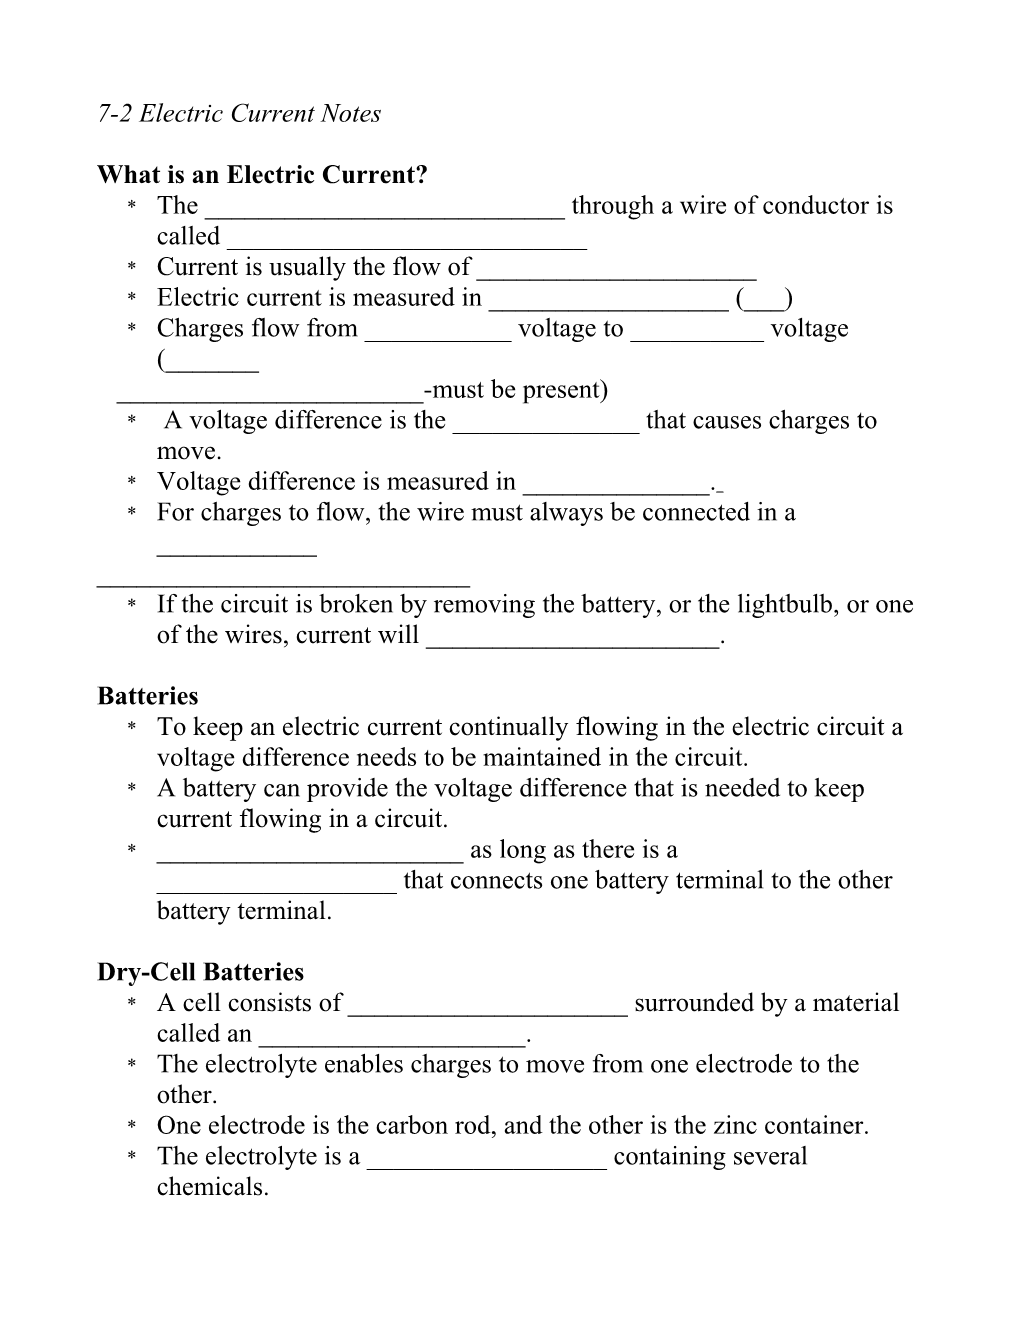 What Is an Electric Current?